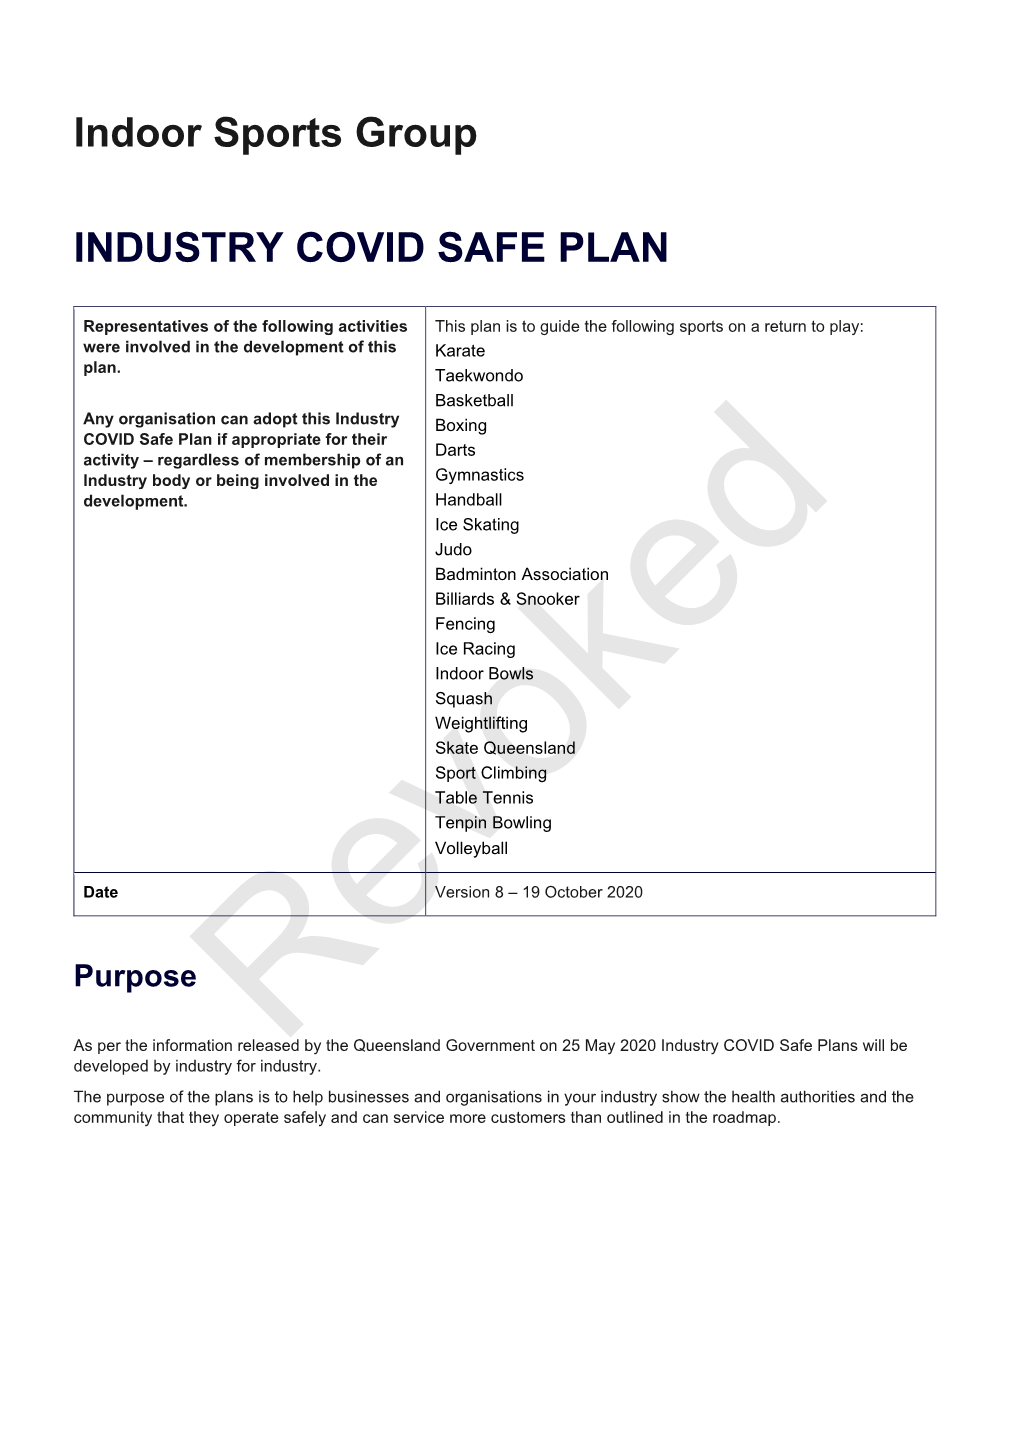 COVID Safe Indoor Sports Group Industry Plan